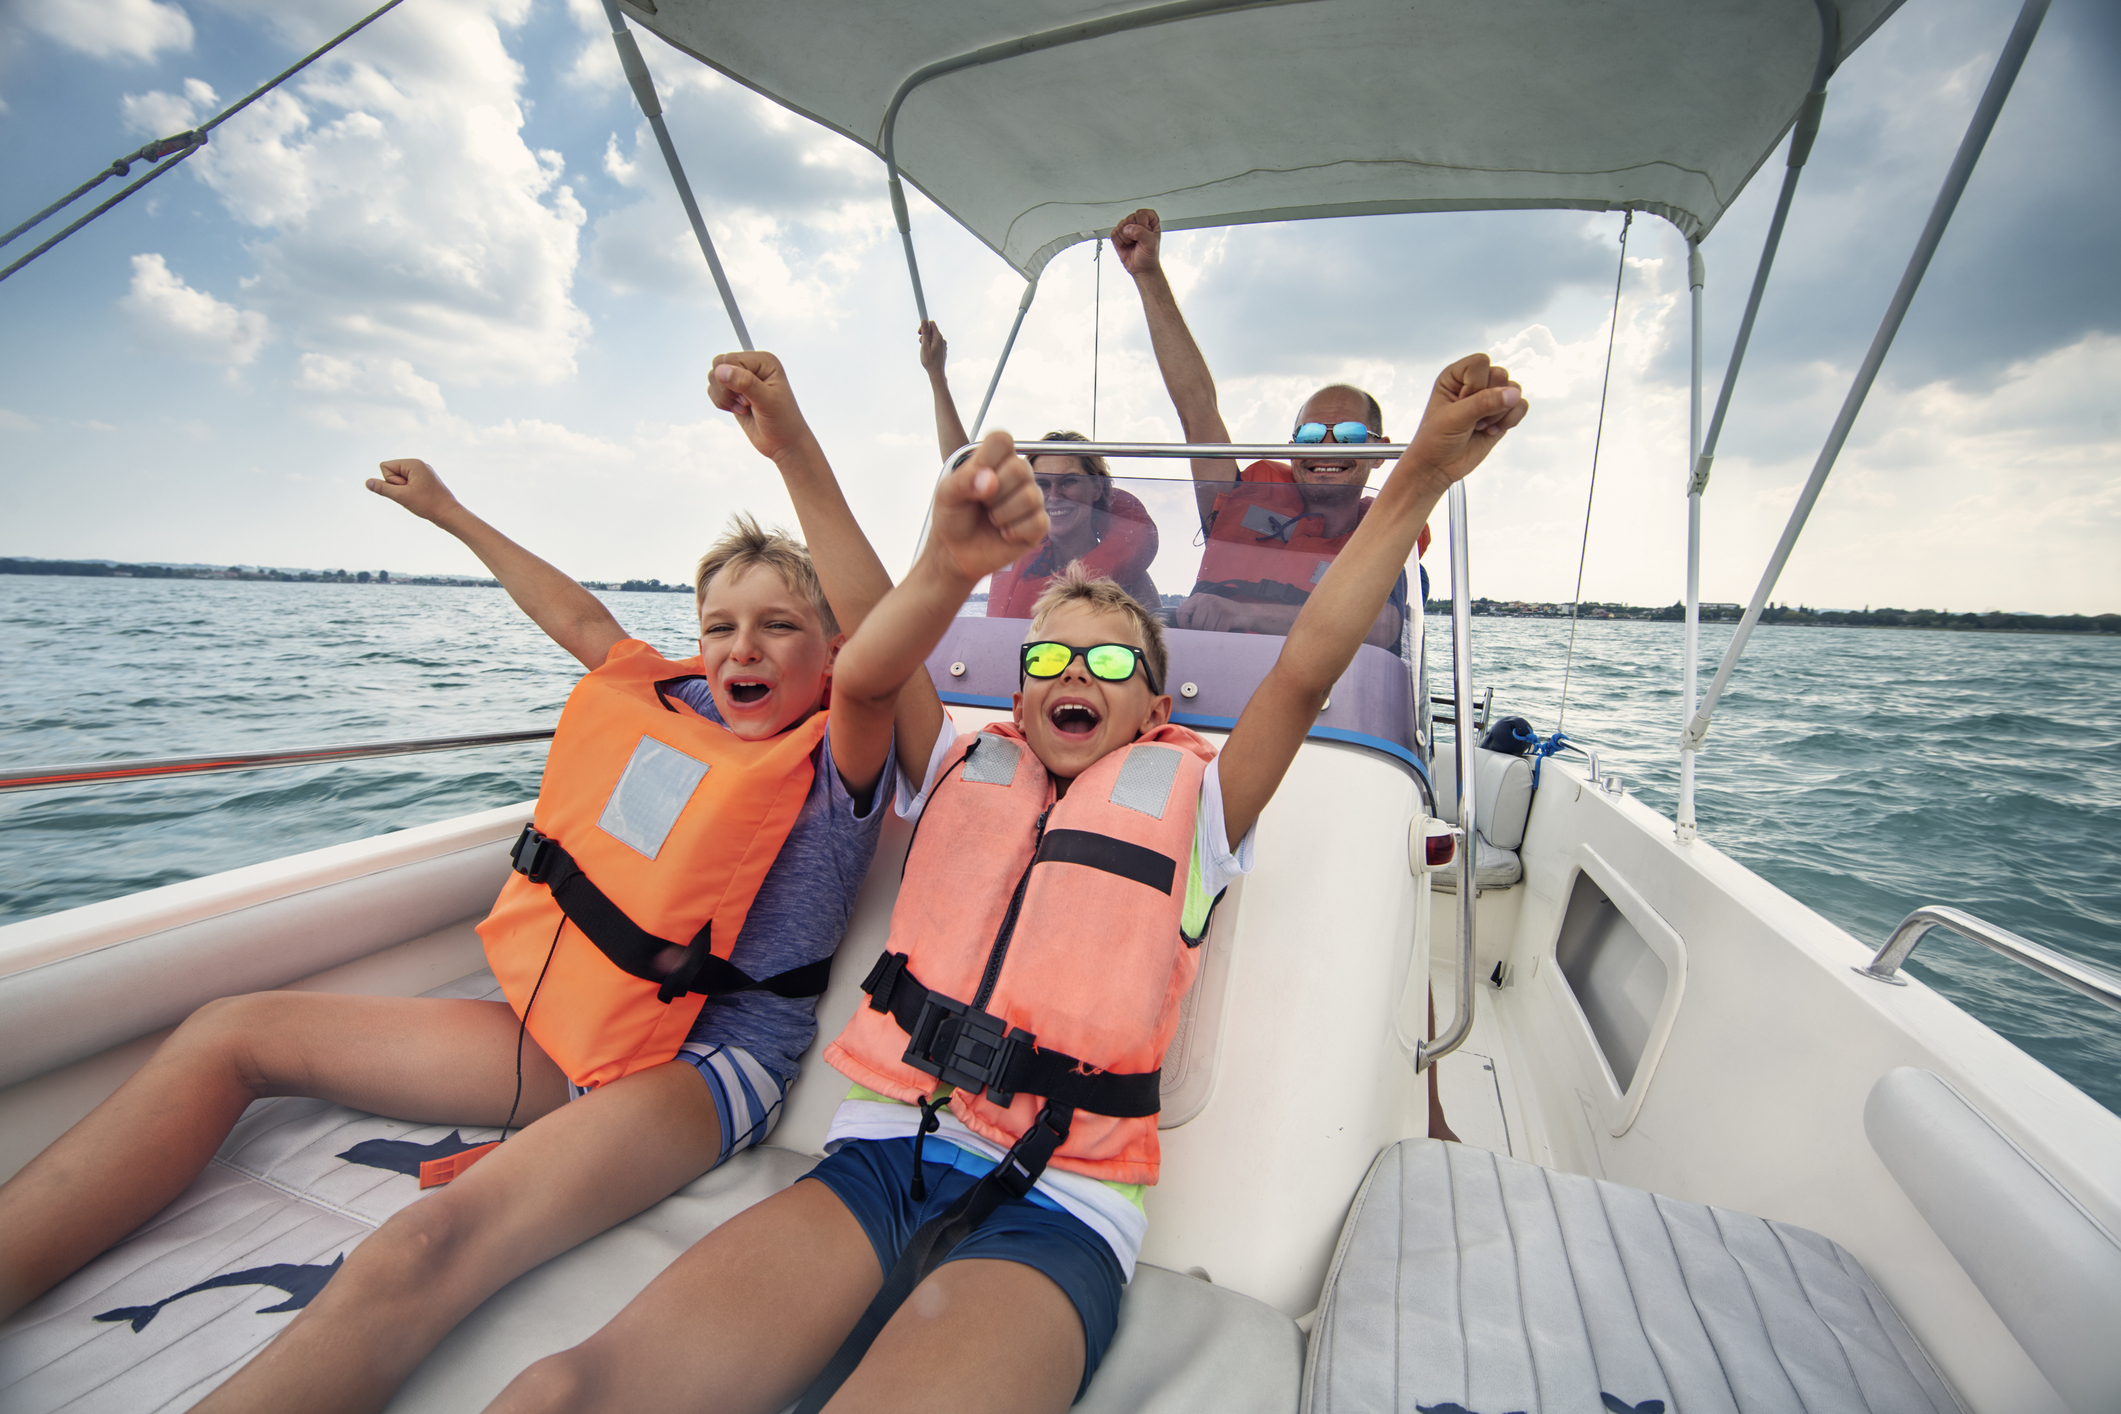 Top boat safety tips from the experts at Canadian Safe Boating Council